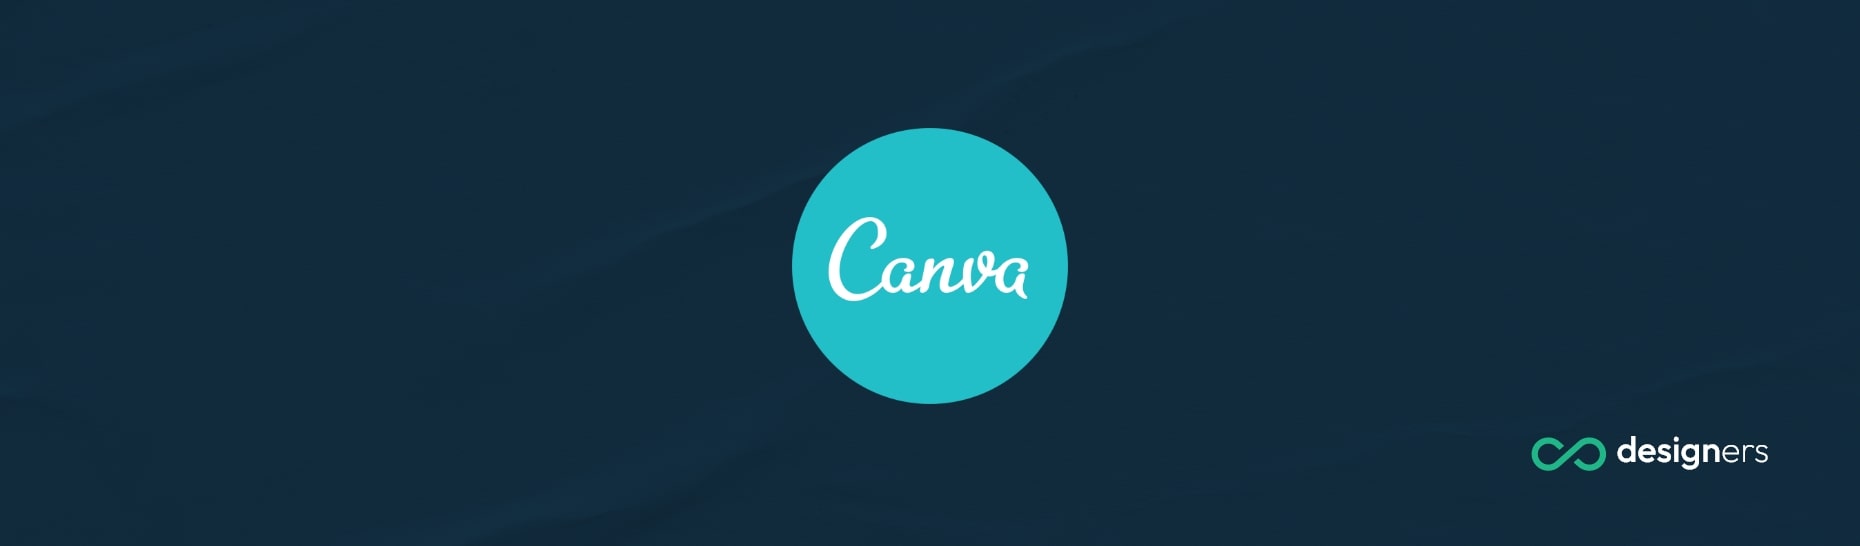 What Is the Color Code for Gold in Canva?